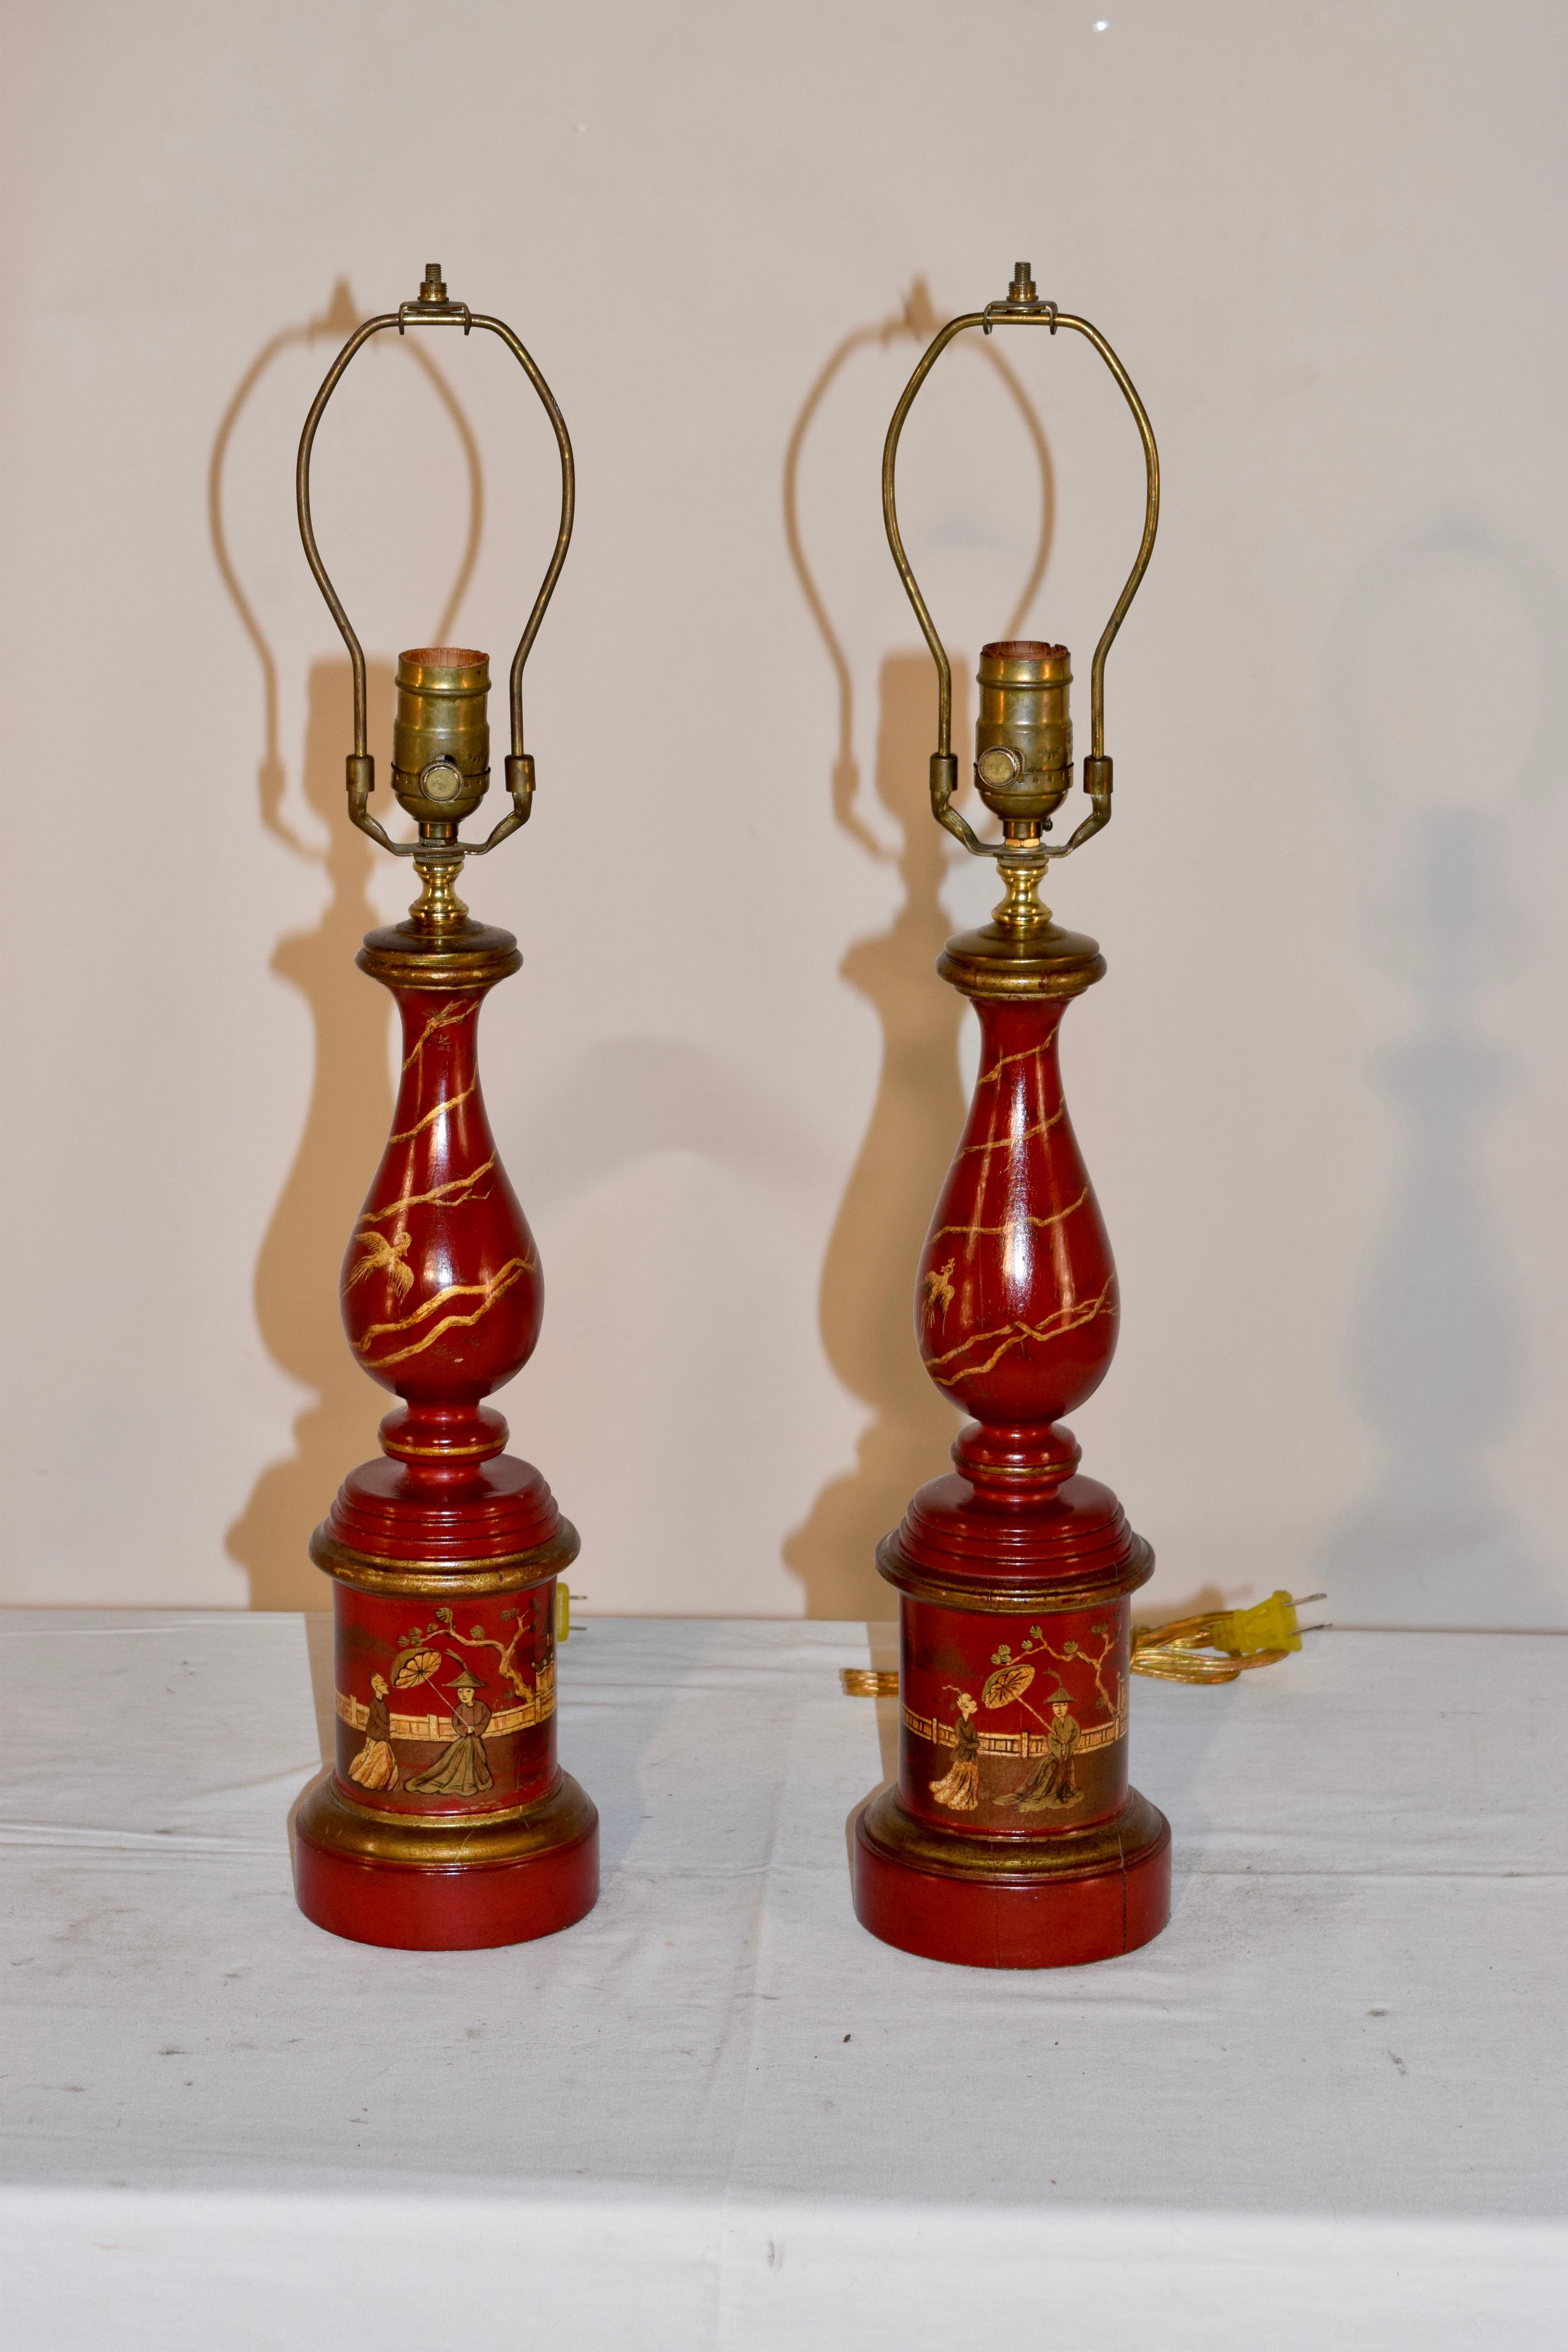 Pair of chinoiserie table lamps in a luscious red with hand painted decoration in shades of gold and brown.